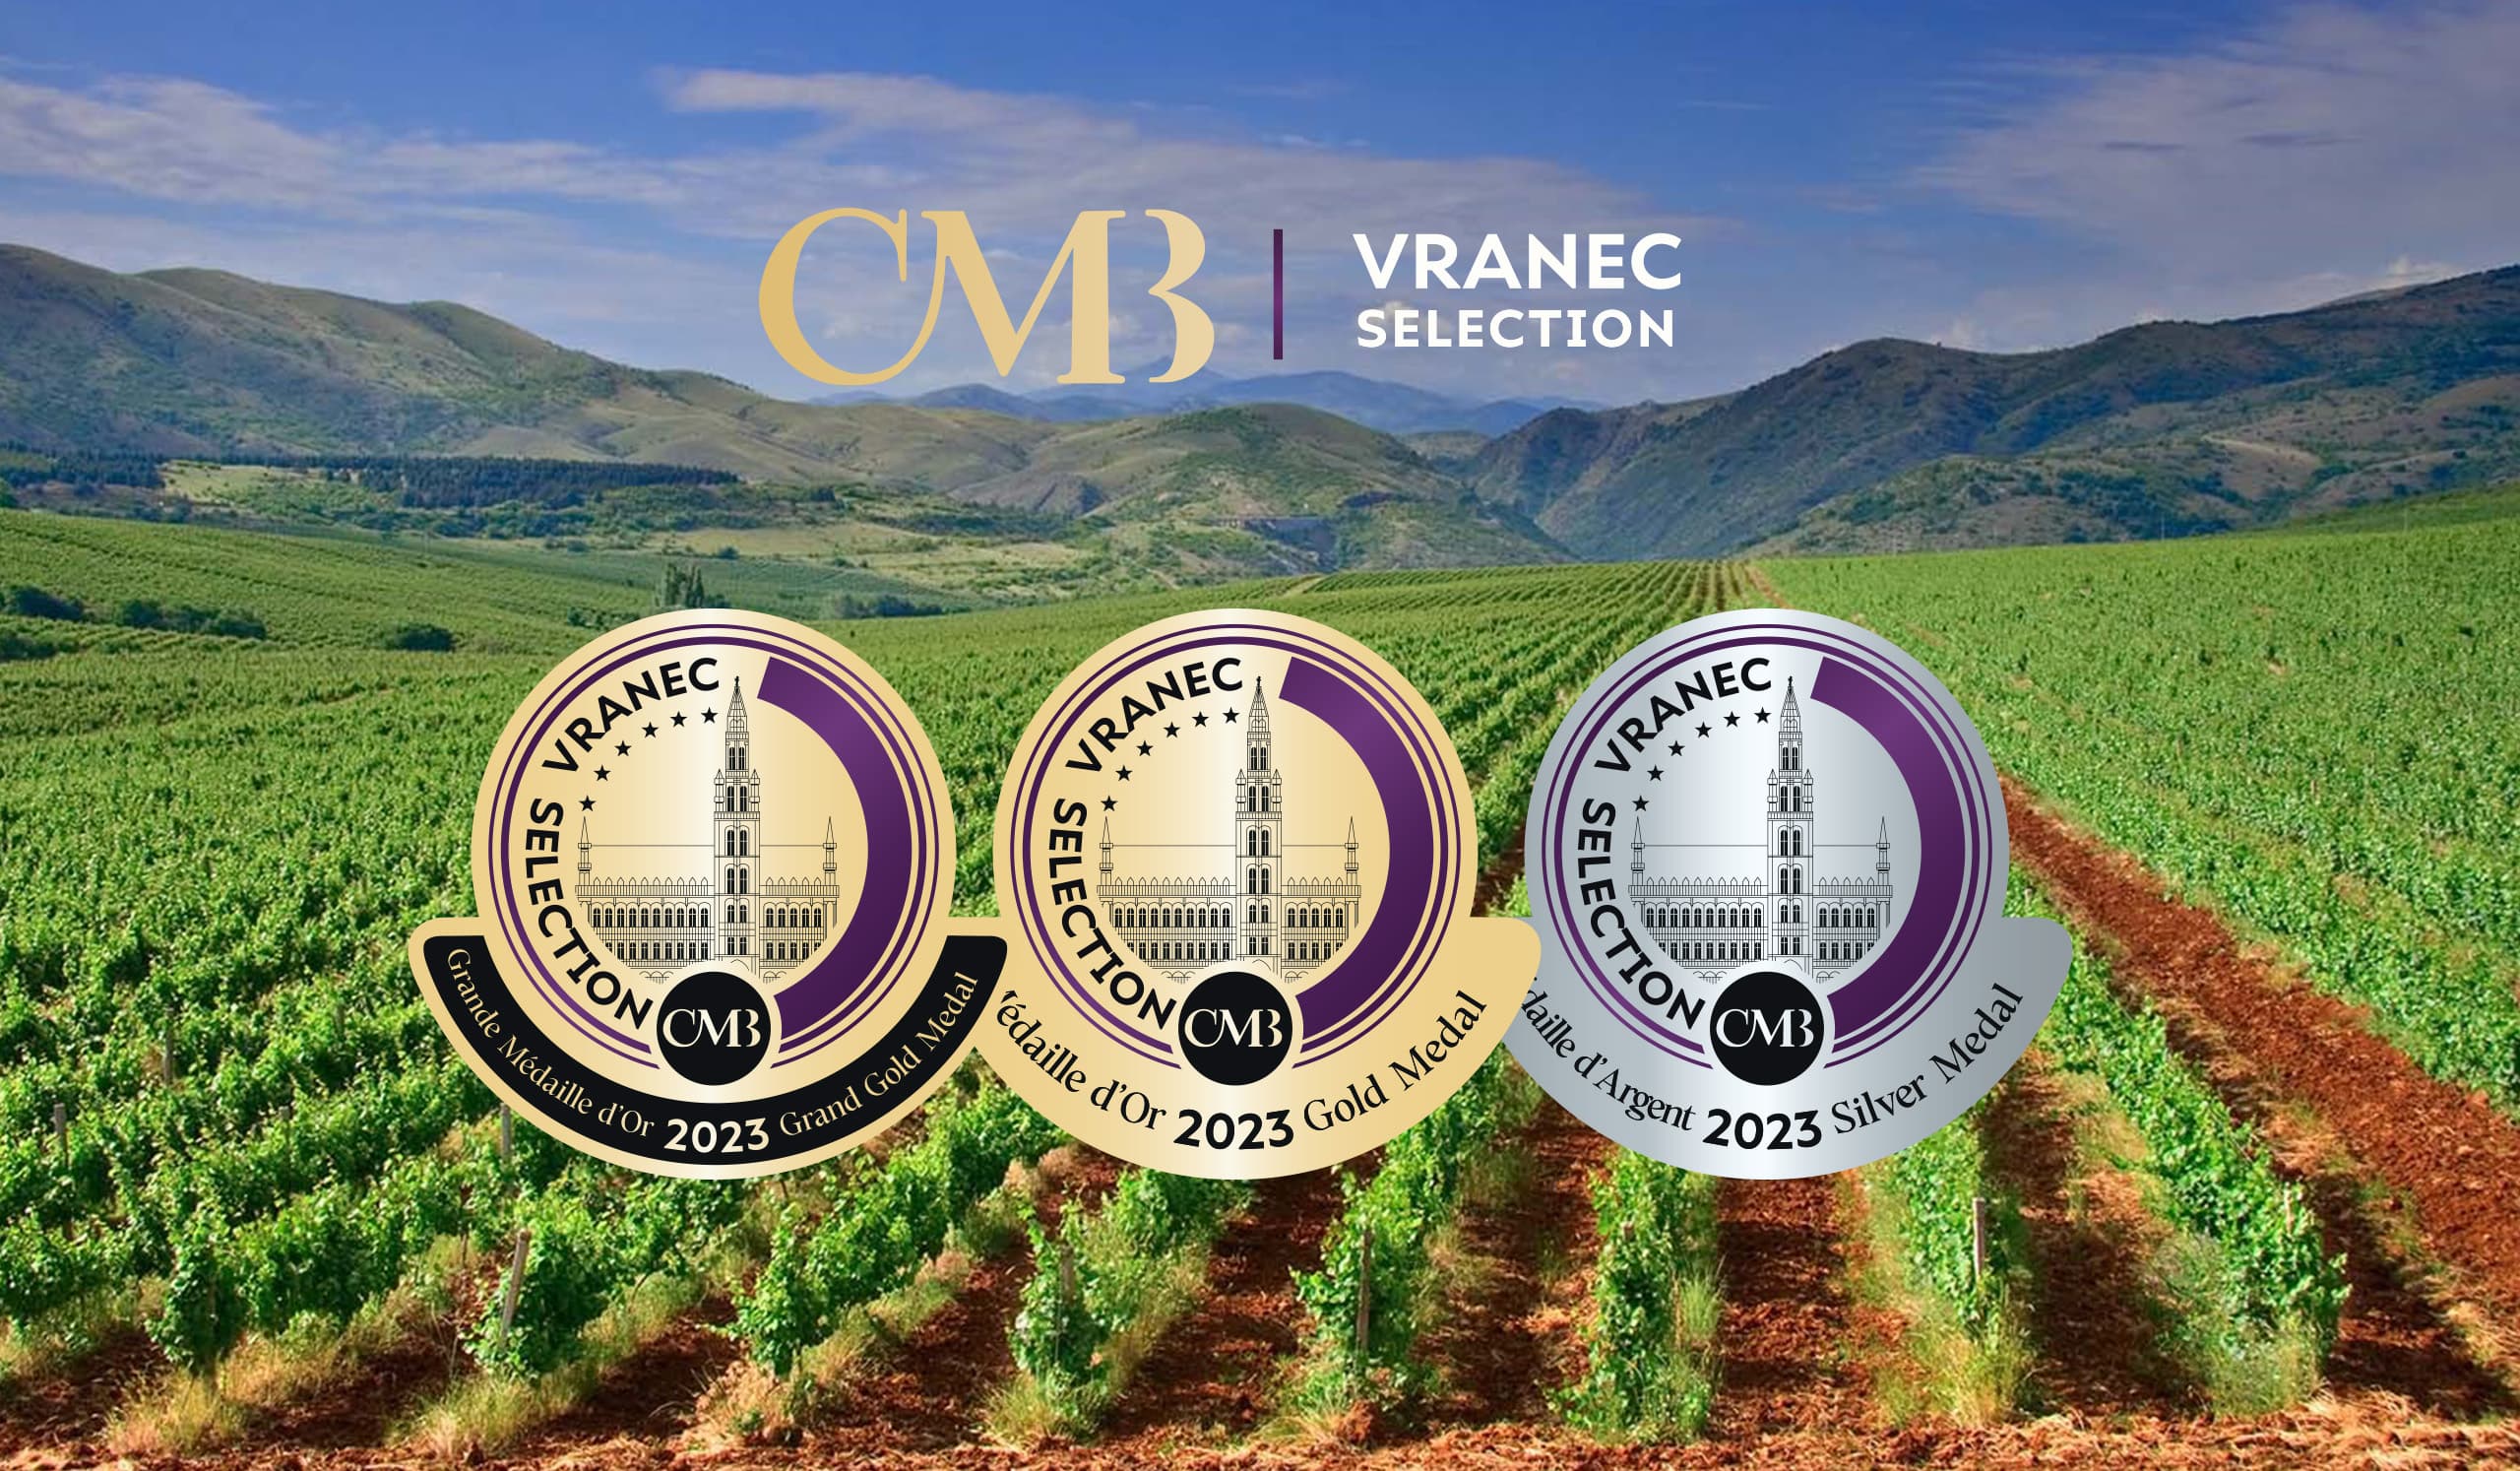 CMB launches a new session dedicated to Vranec